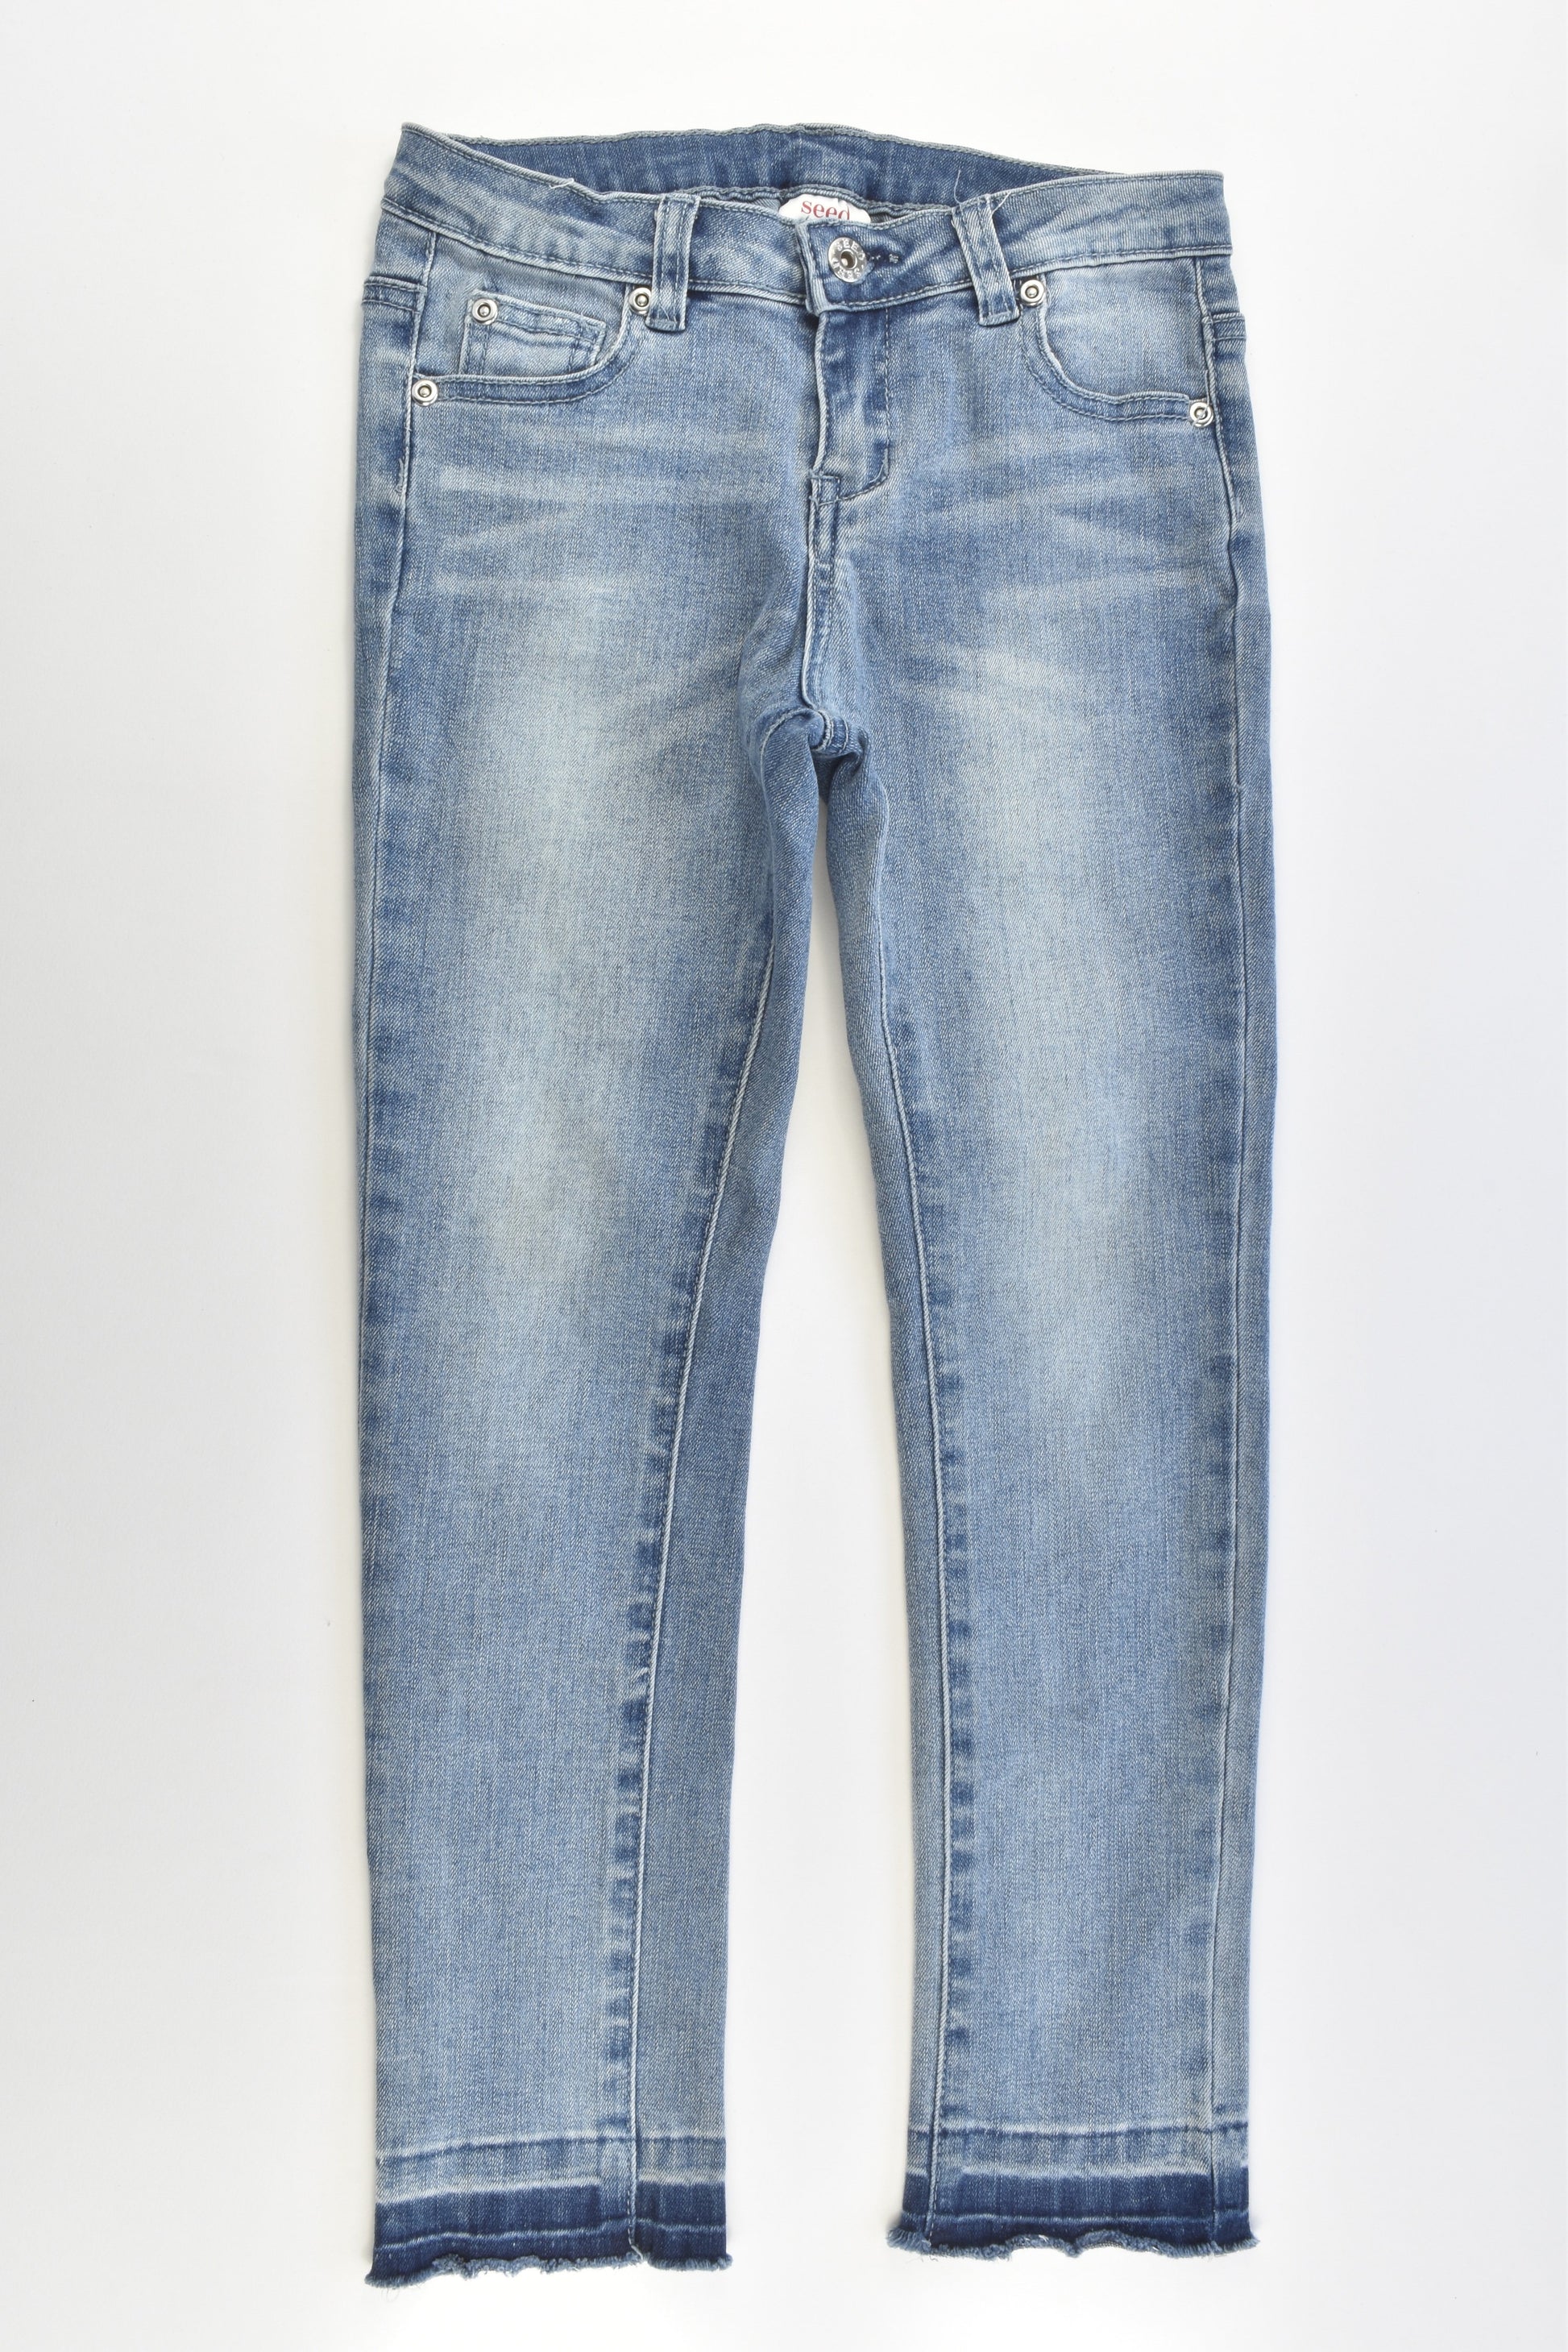 Seed Heritage Size 7 Stretchy Denim Pants